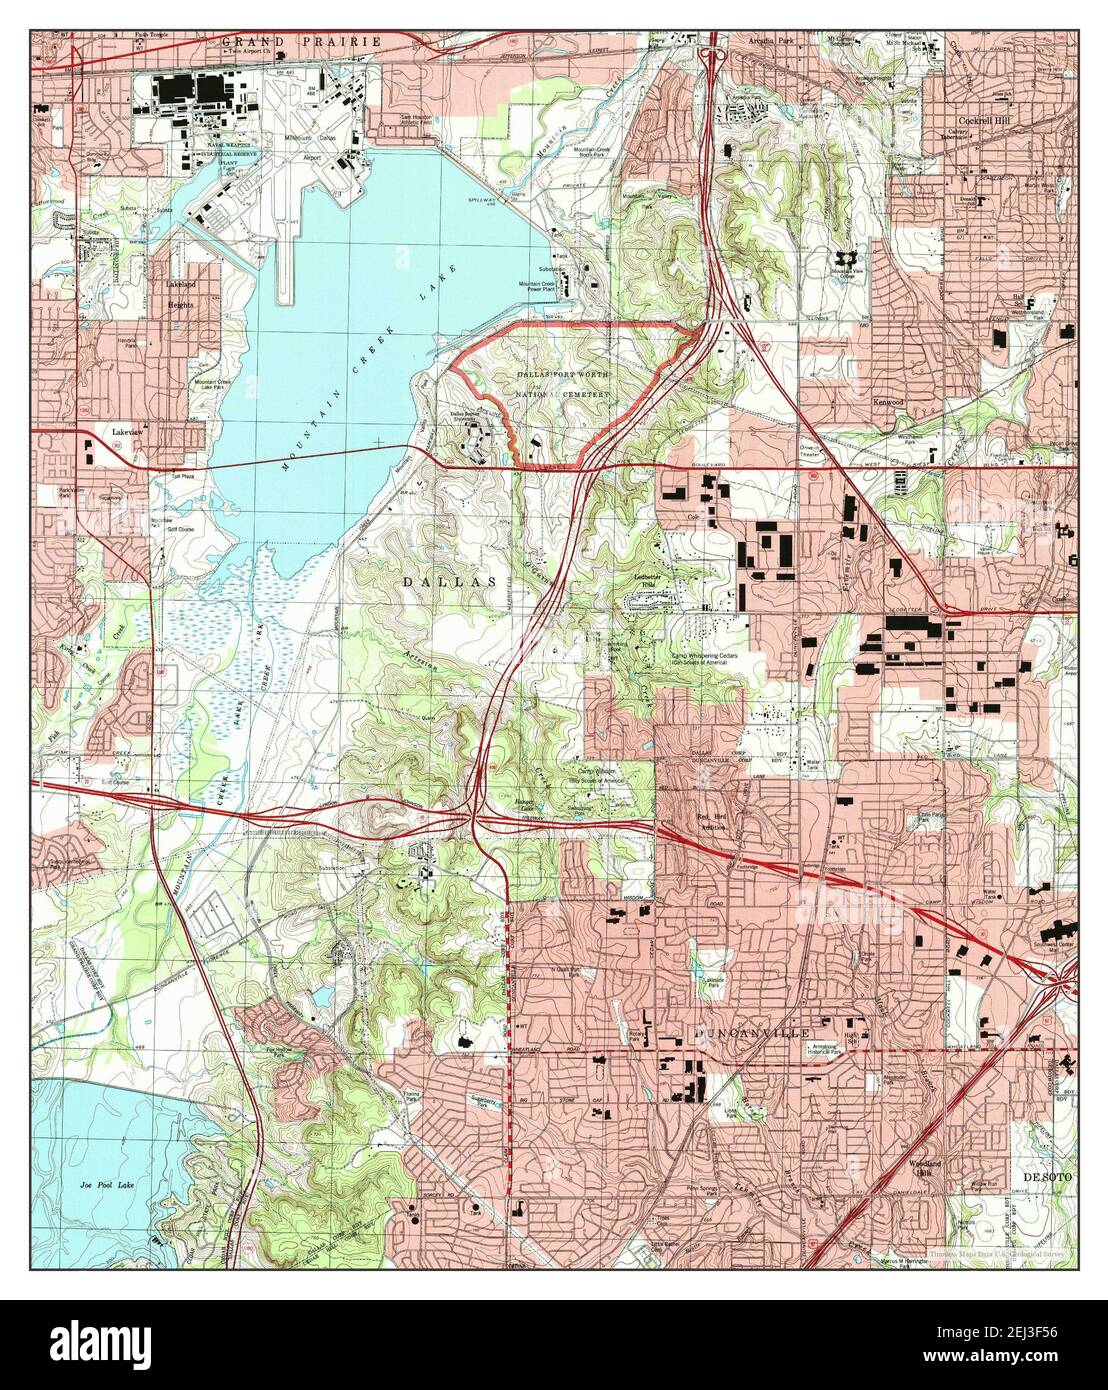 Duncanville, Texas, map 1995, 1:24000, United States of America by Timeless Maps, data U.S. Geological Survey Stock Photo